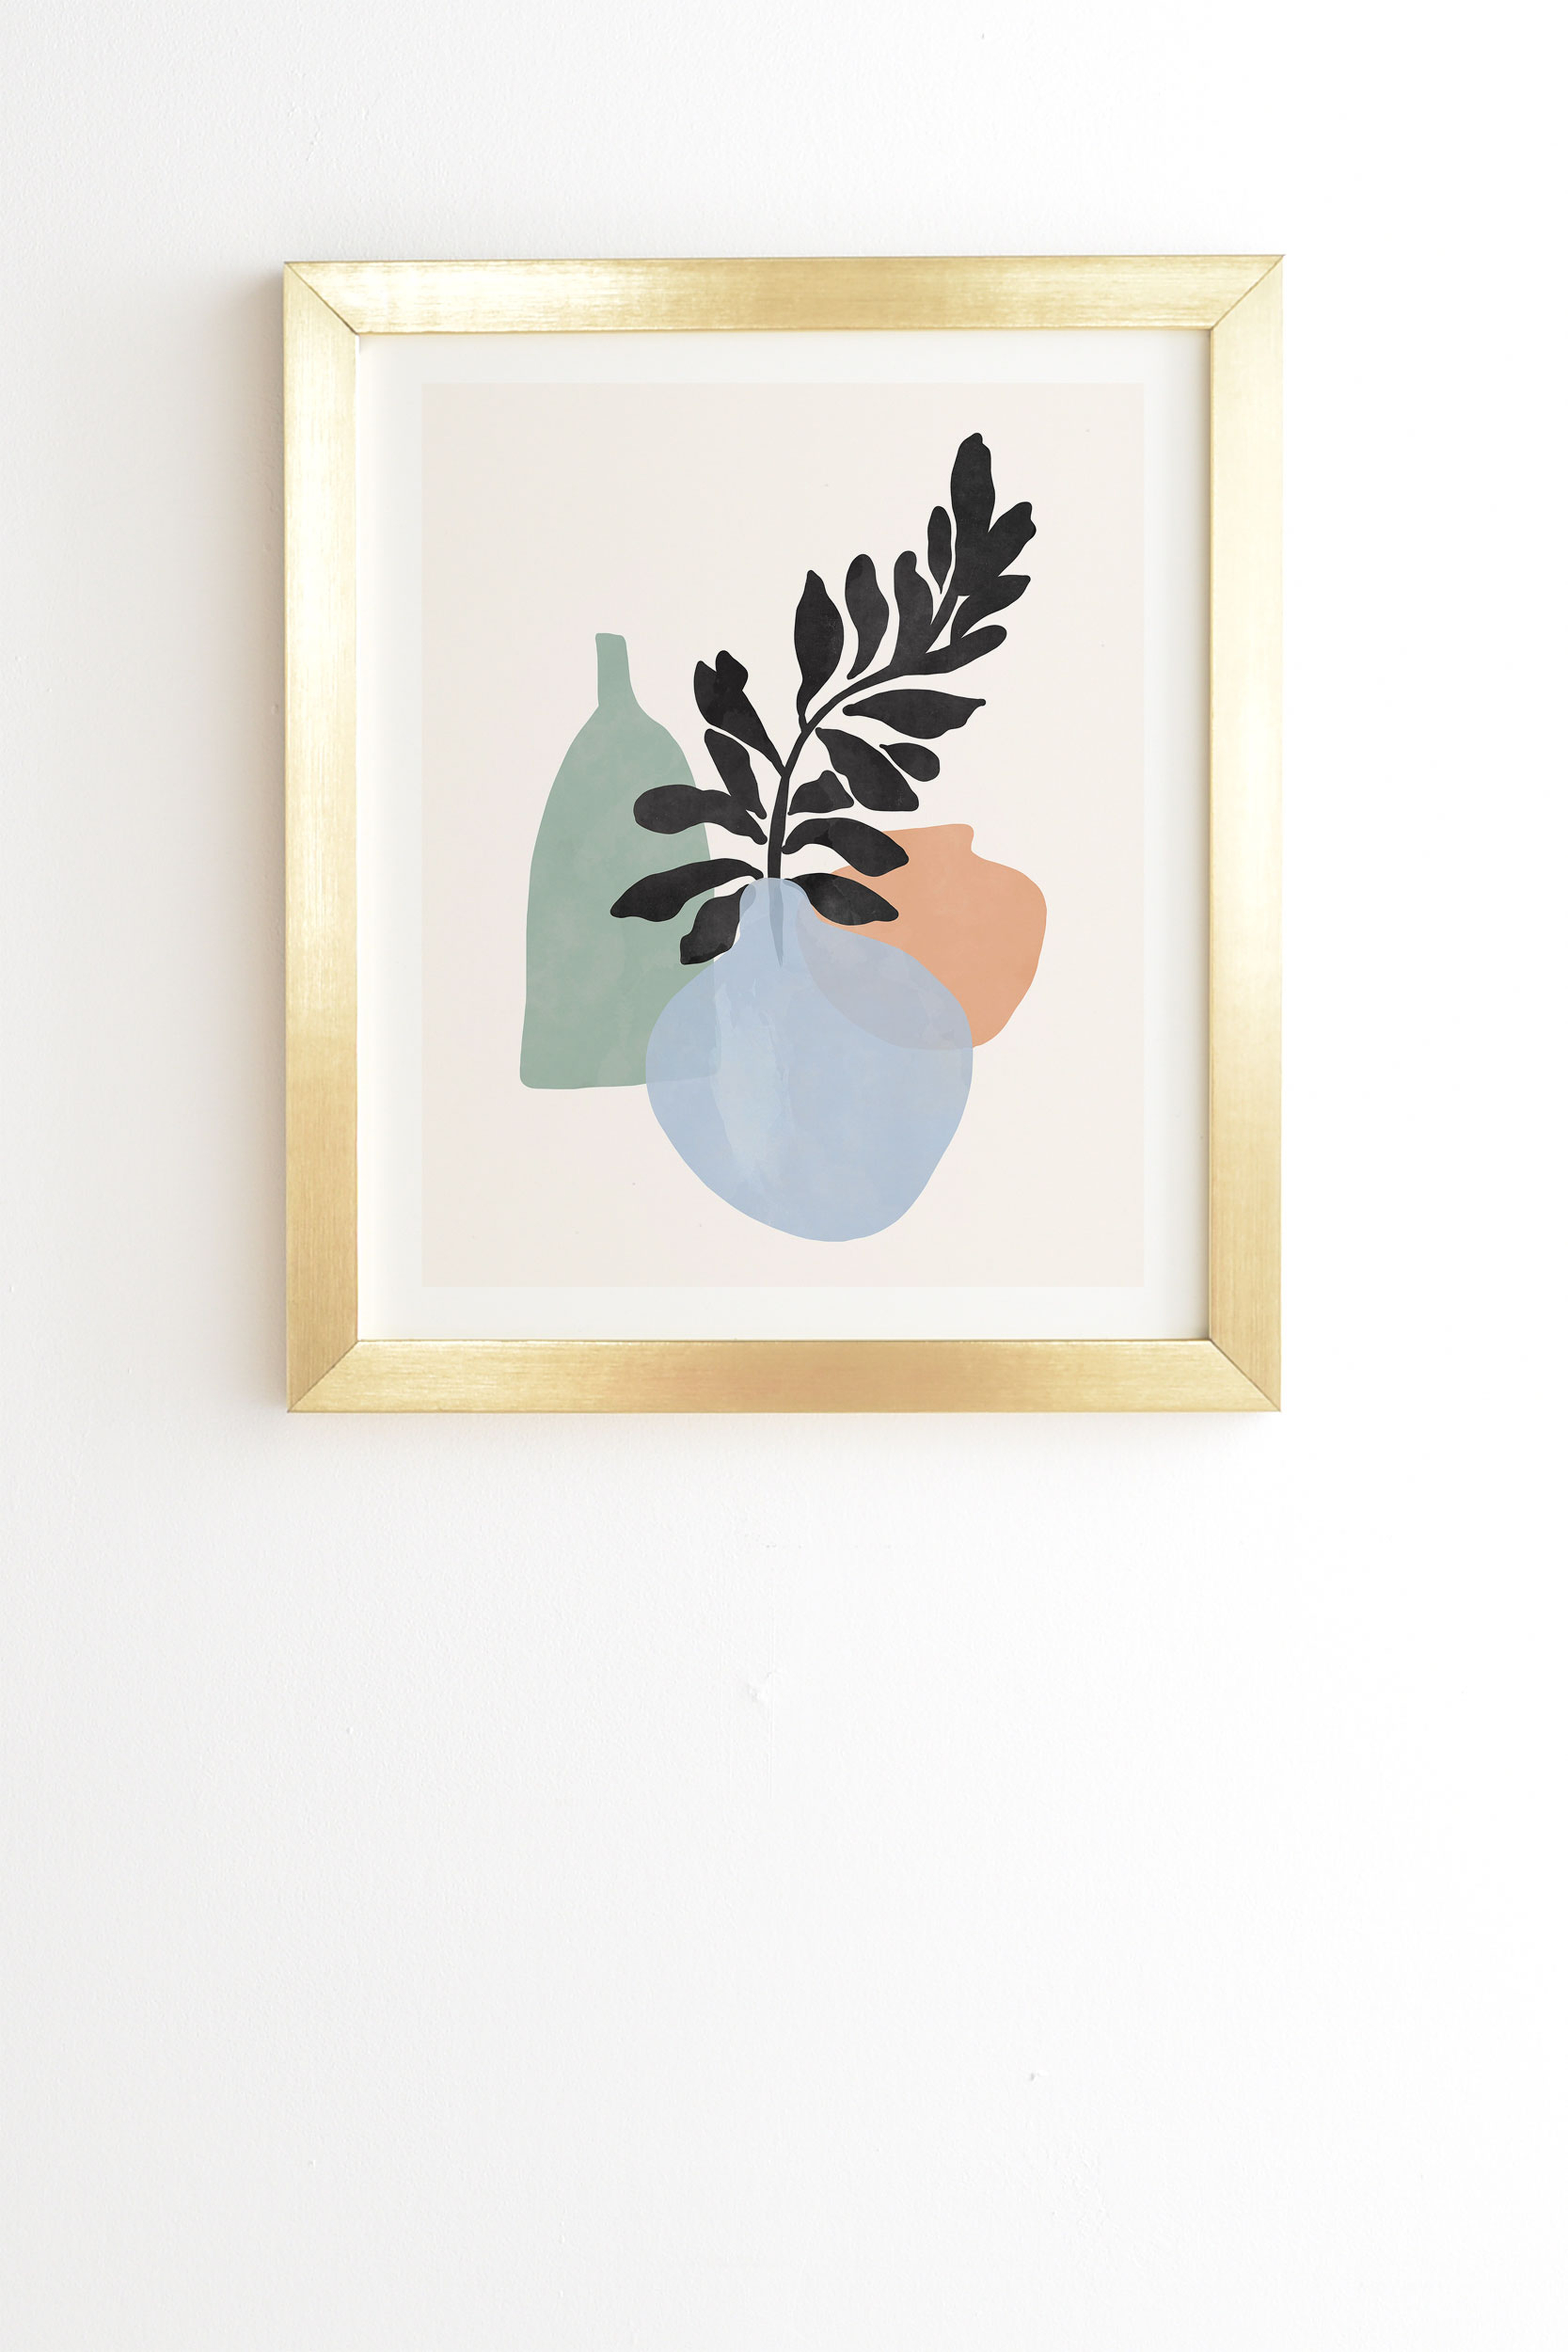 Sea Glass Vases by Gale Switzer - Framed Wall Art Basic Gold 19" x 22.4" - Wander Print Co.